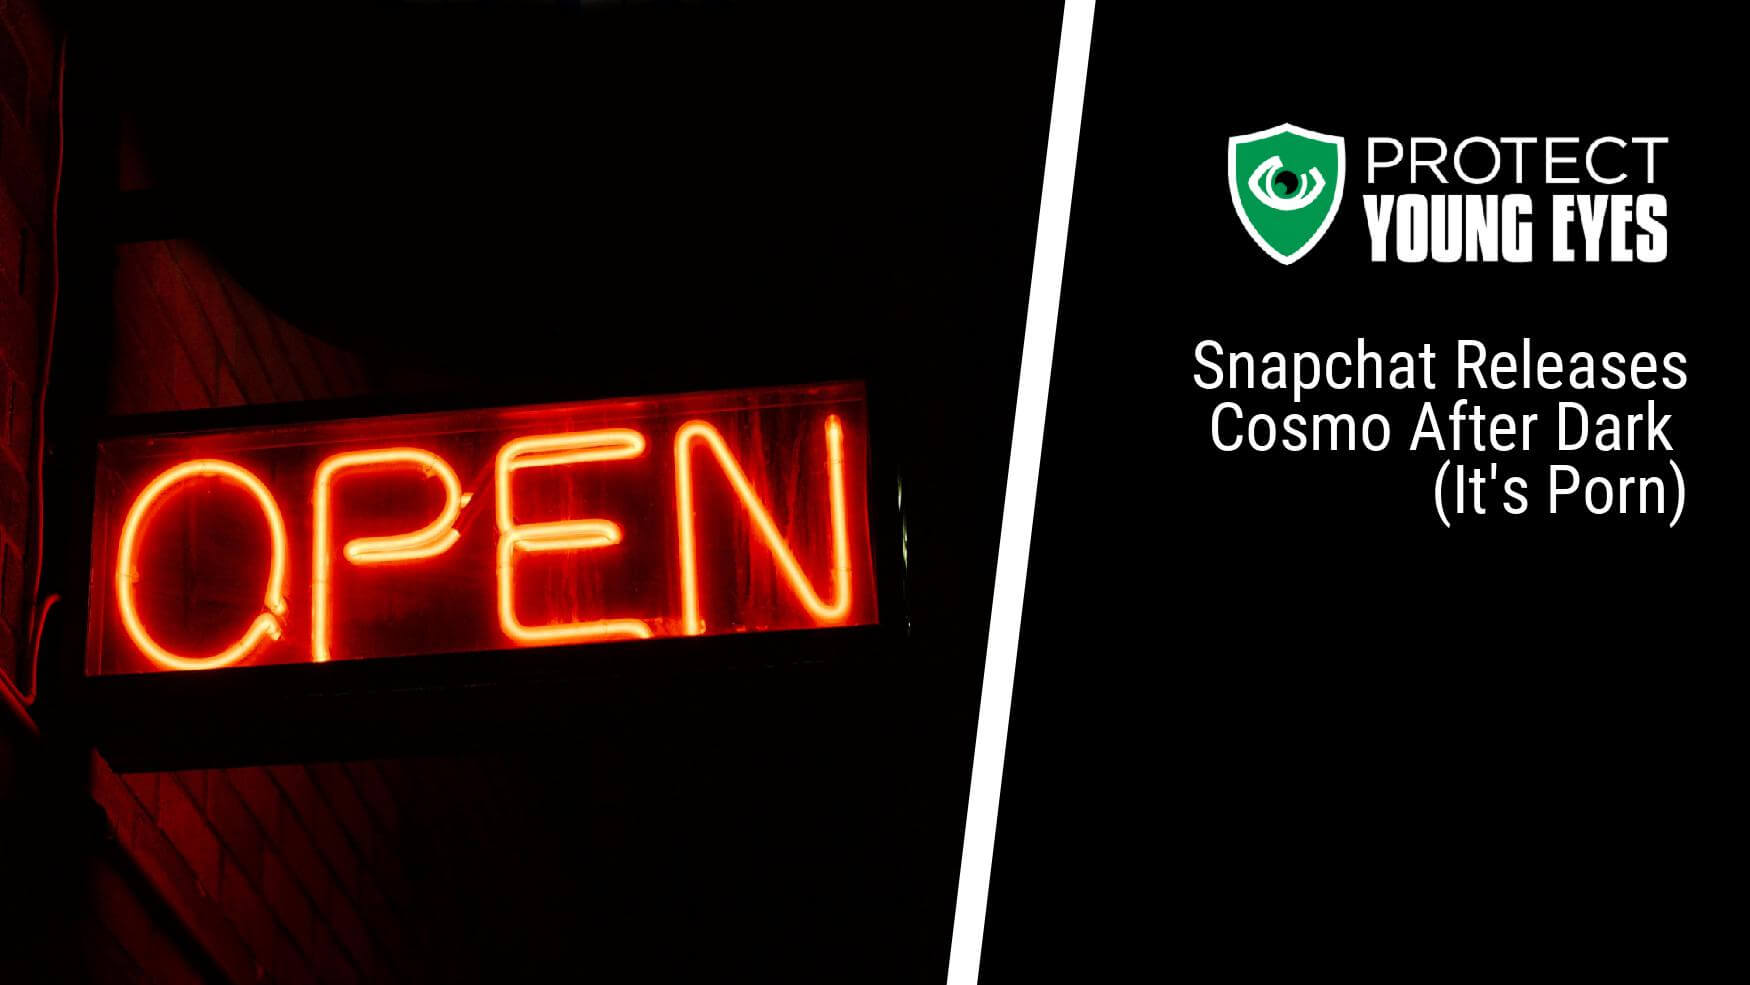 Snapchat Introduces Cosmo After Dark (p*rn) Protect Young Eyes Blog